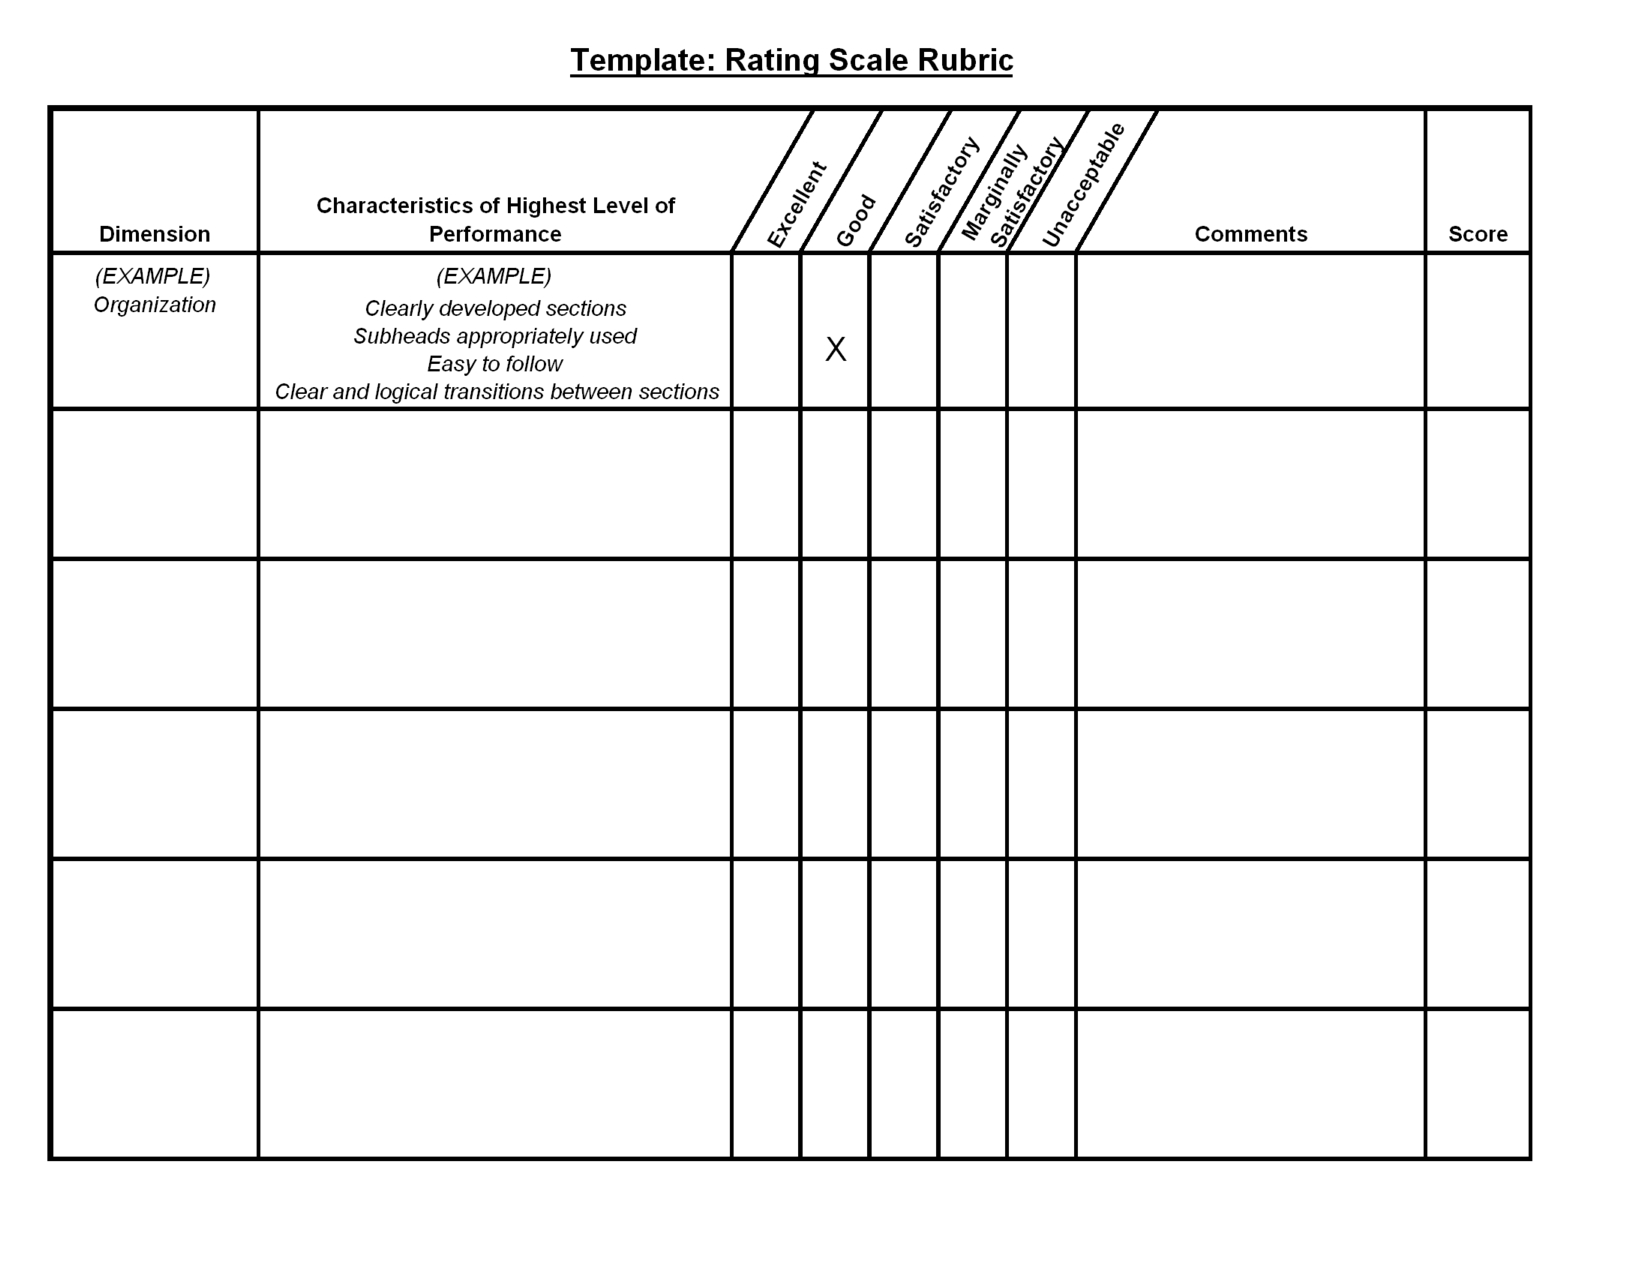 Rubric Templates | Template Rating Scale Rubric | Family And For Blank Rubric Template